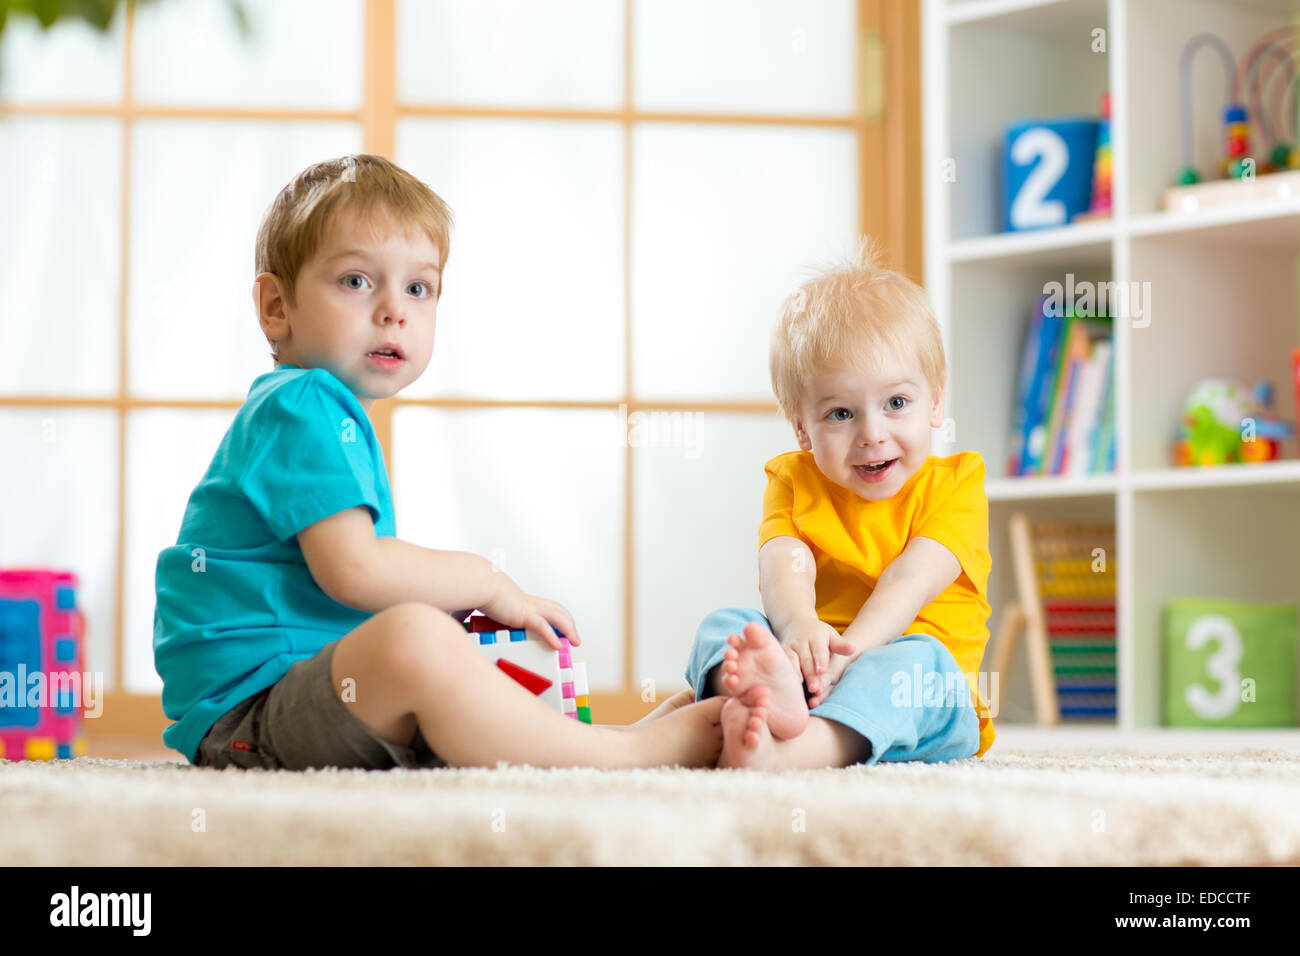 two little boys play together with educational toys Stock Photo